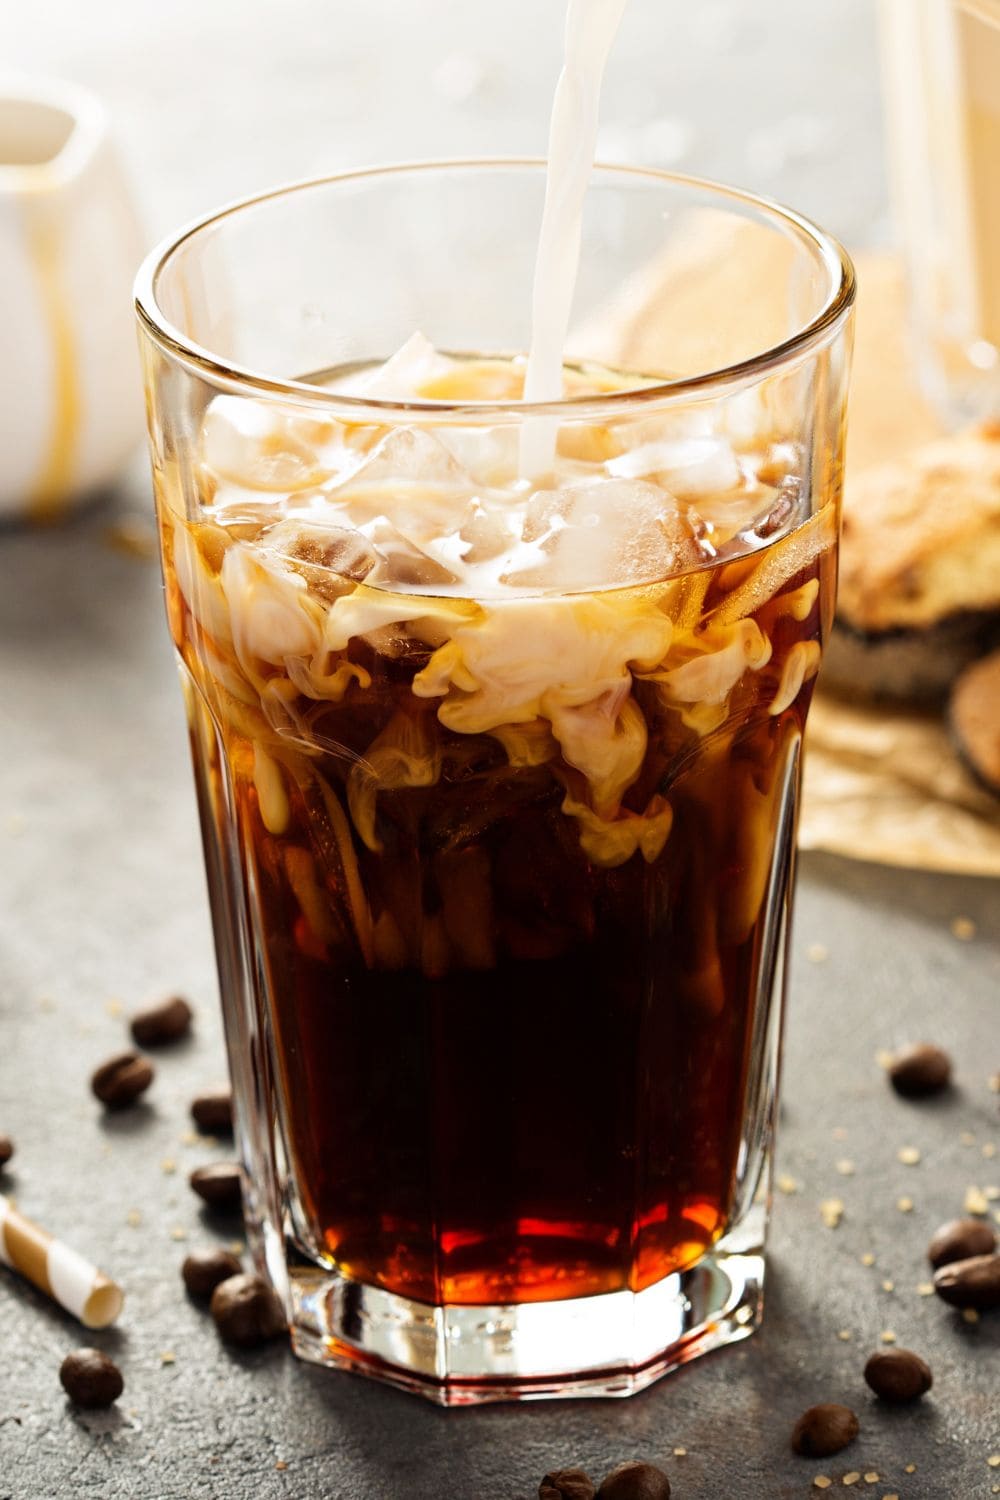 17 Fun Iced Coffee Recipes to Make at Home